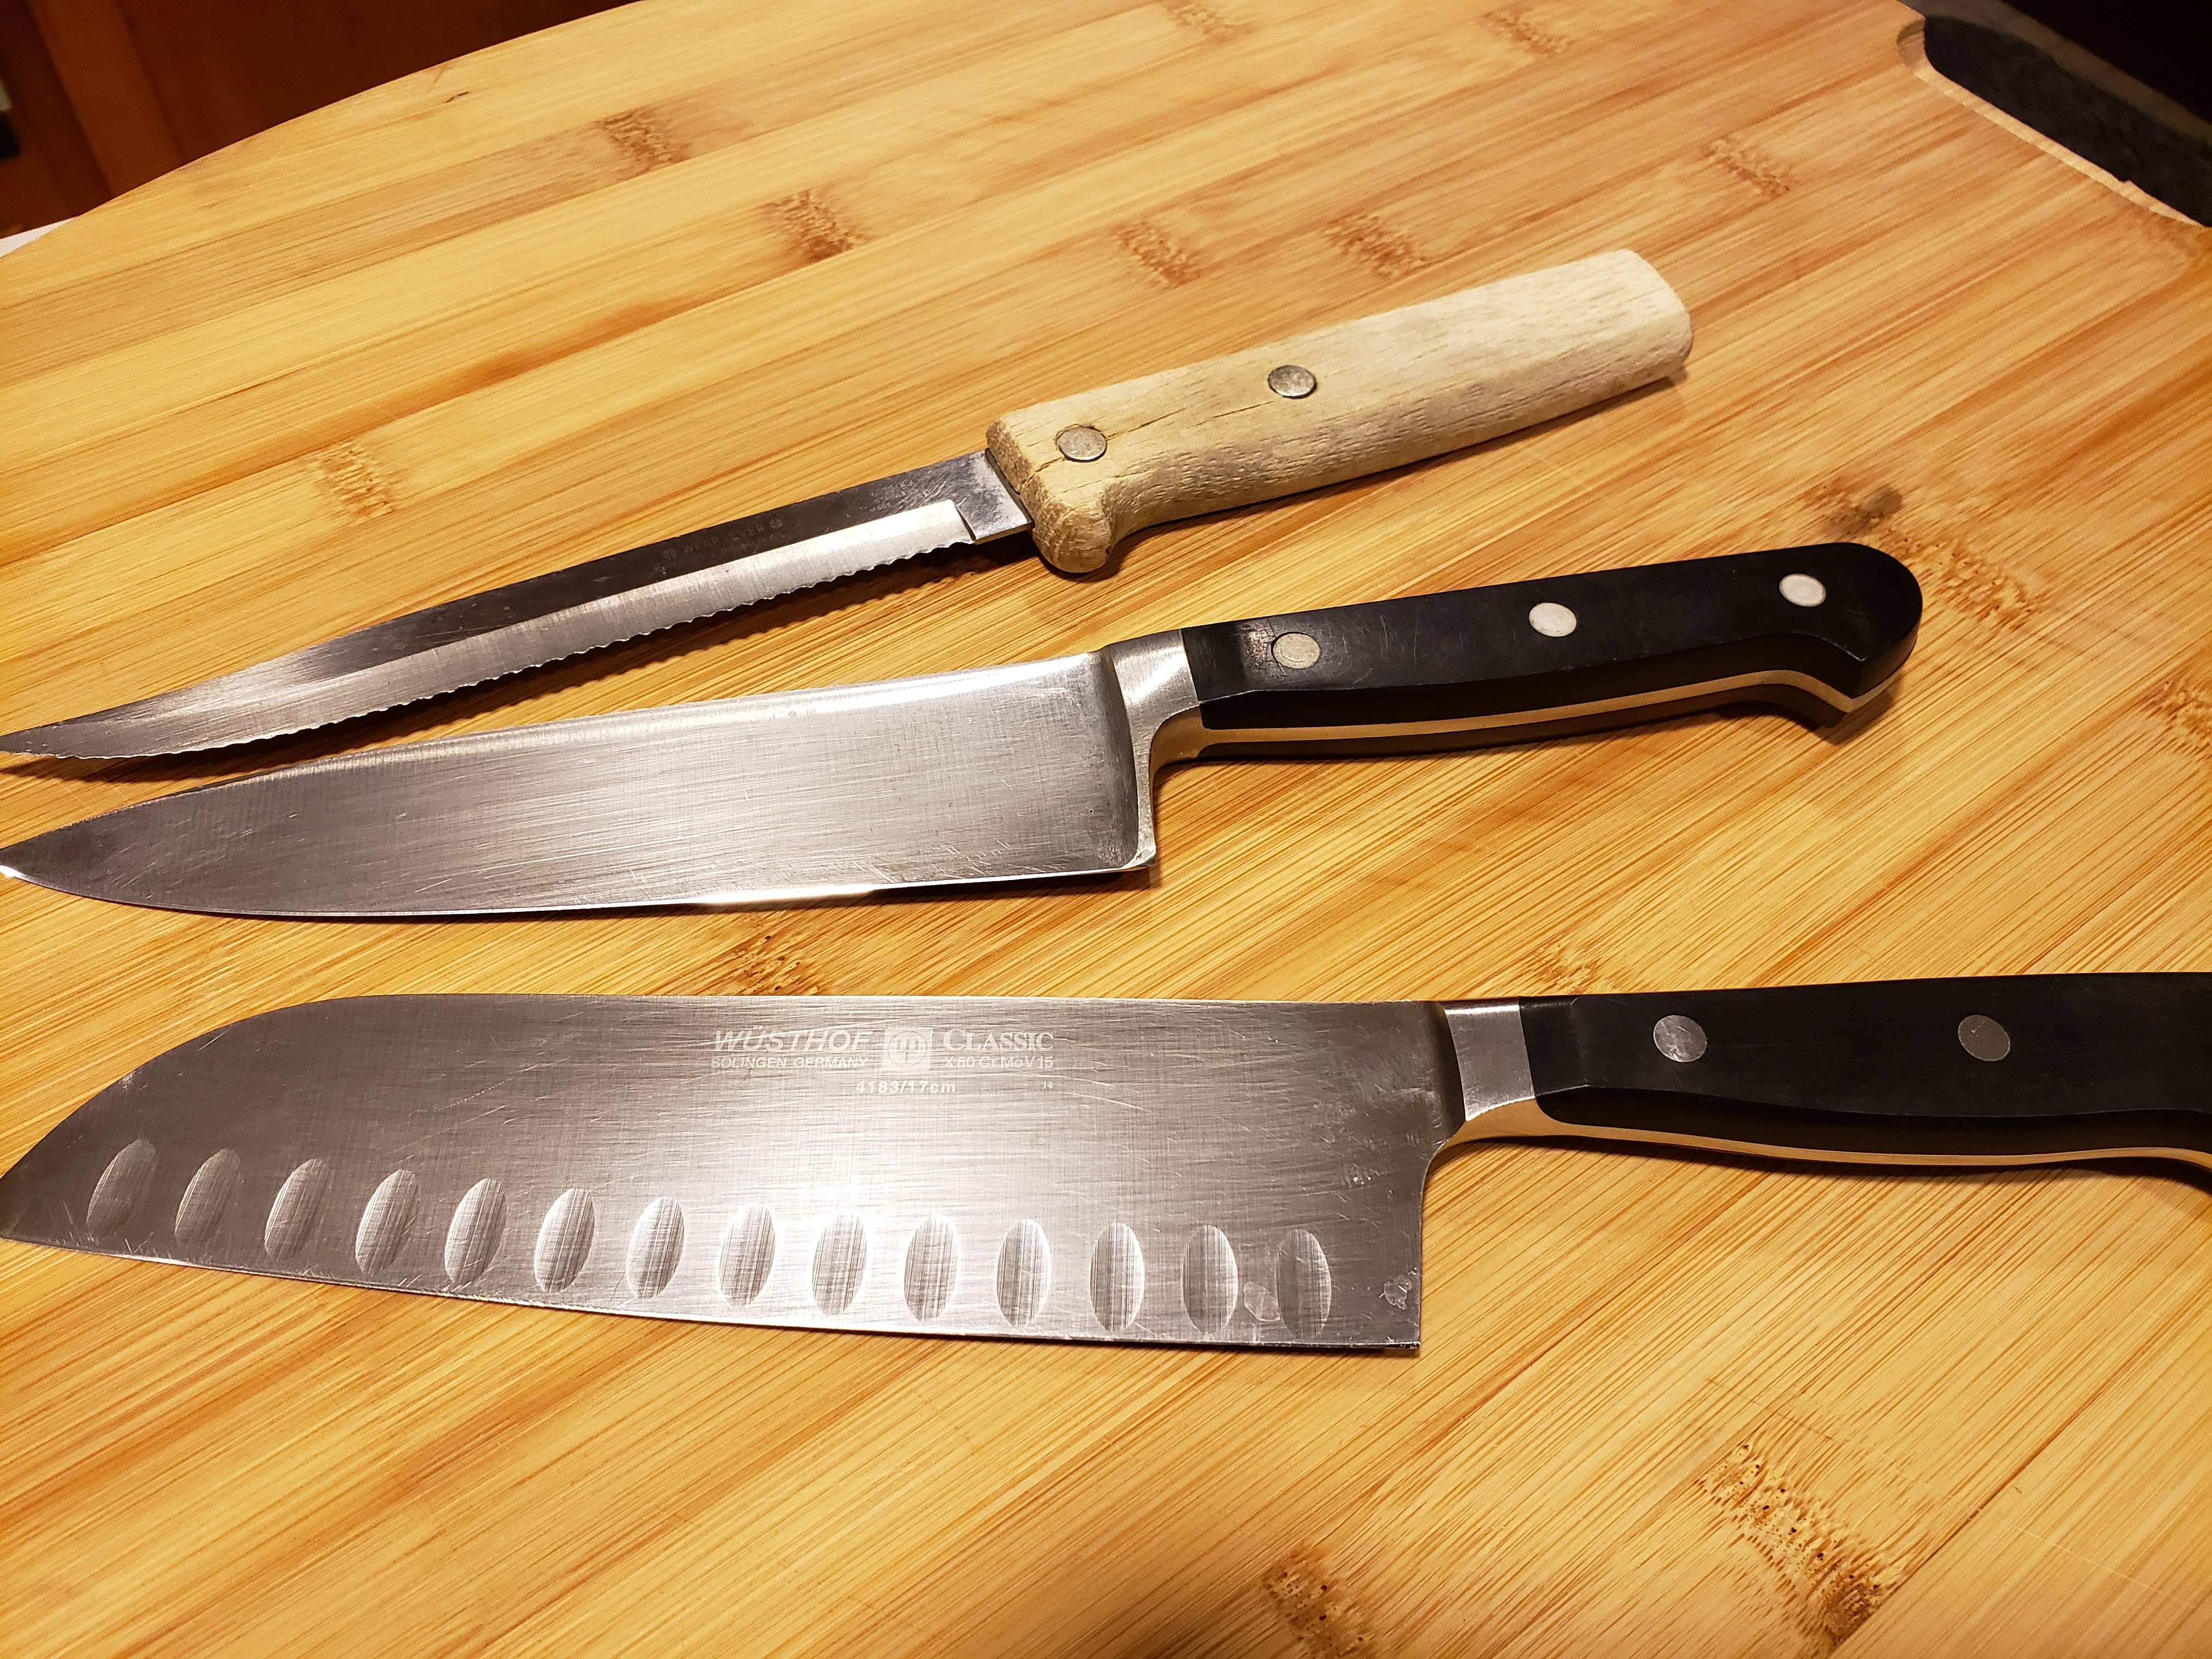 From The Norwalk Hour: Sharp knives equal a better cooking life